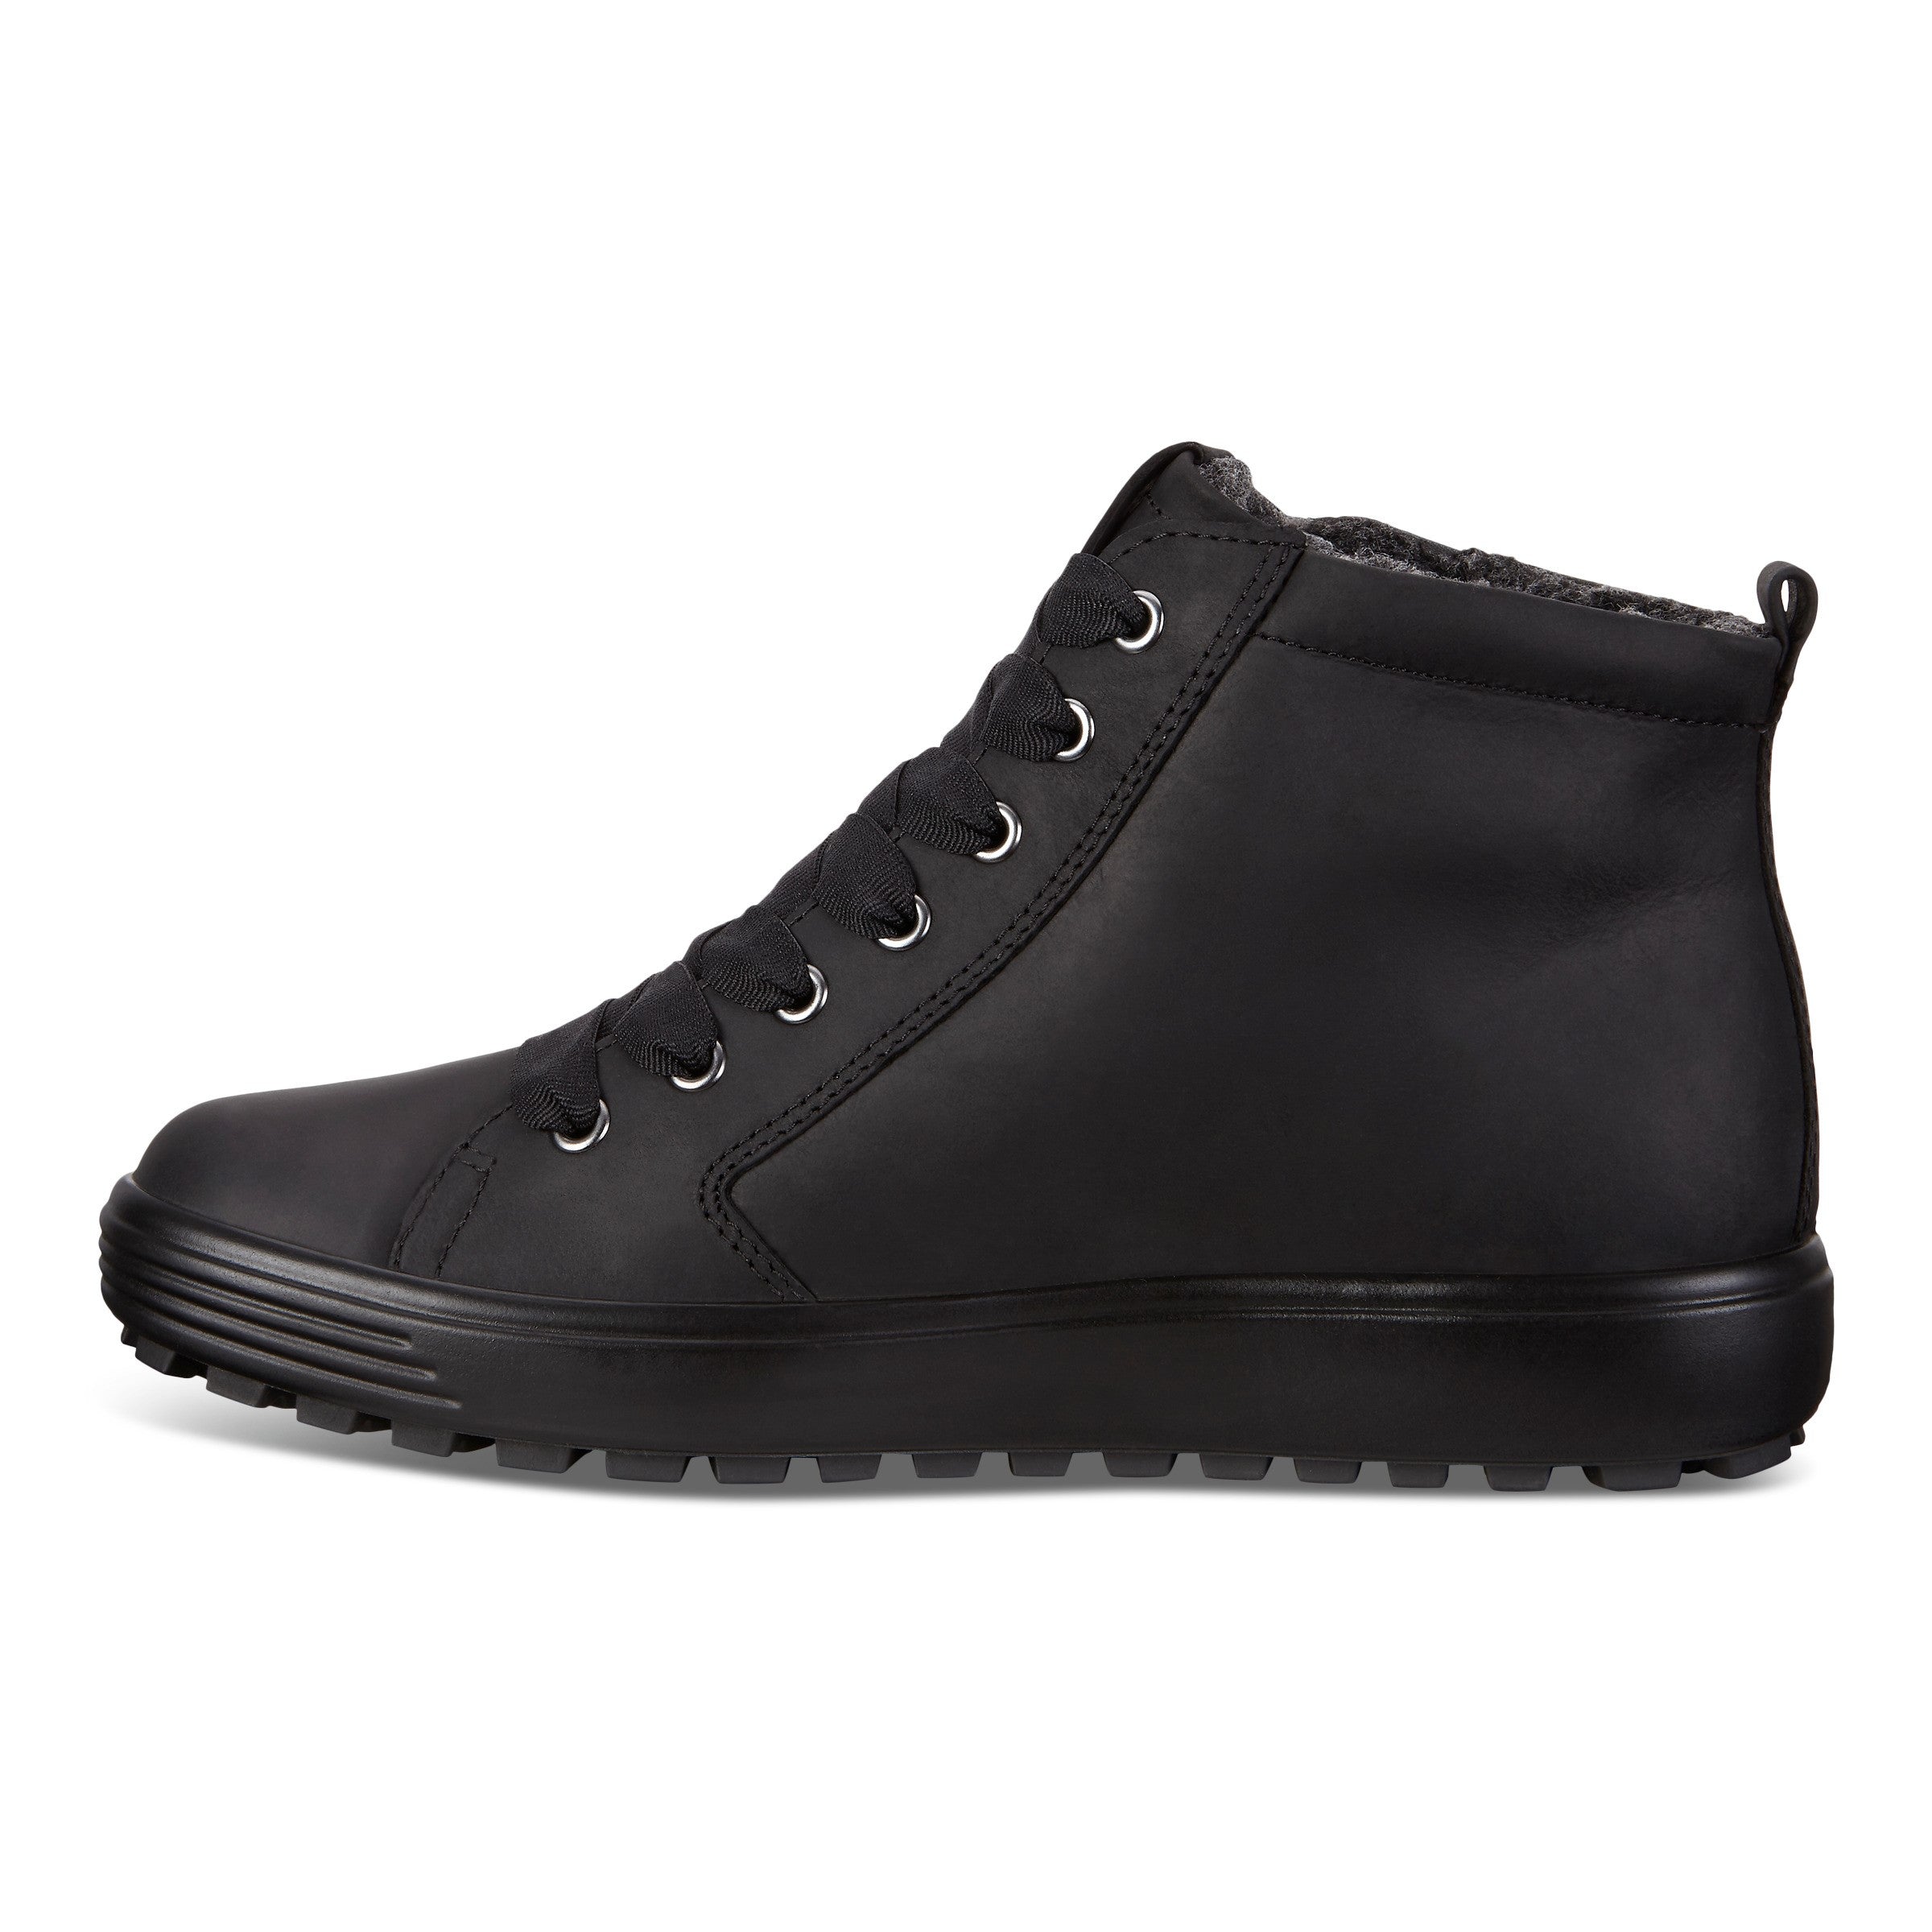 Ecco Soft 7 Tred GTX Hi 450163 02001 Ladies Black Nubuck Waterproof Arch Support Zip & Lace Ankle Boots